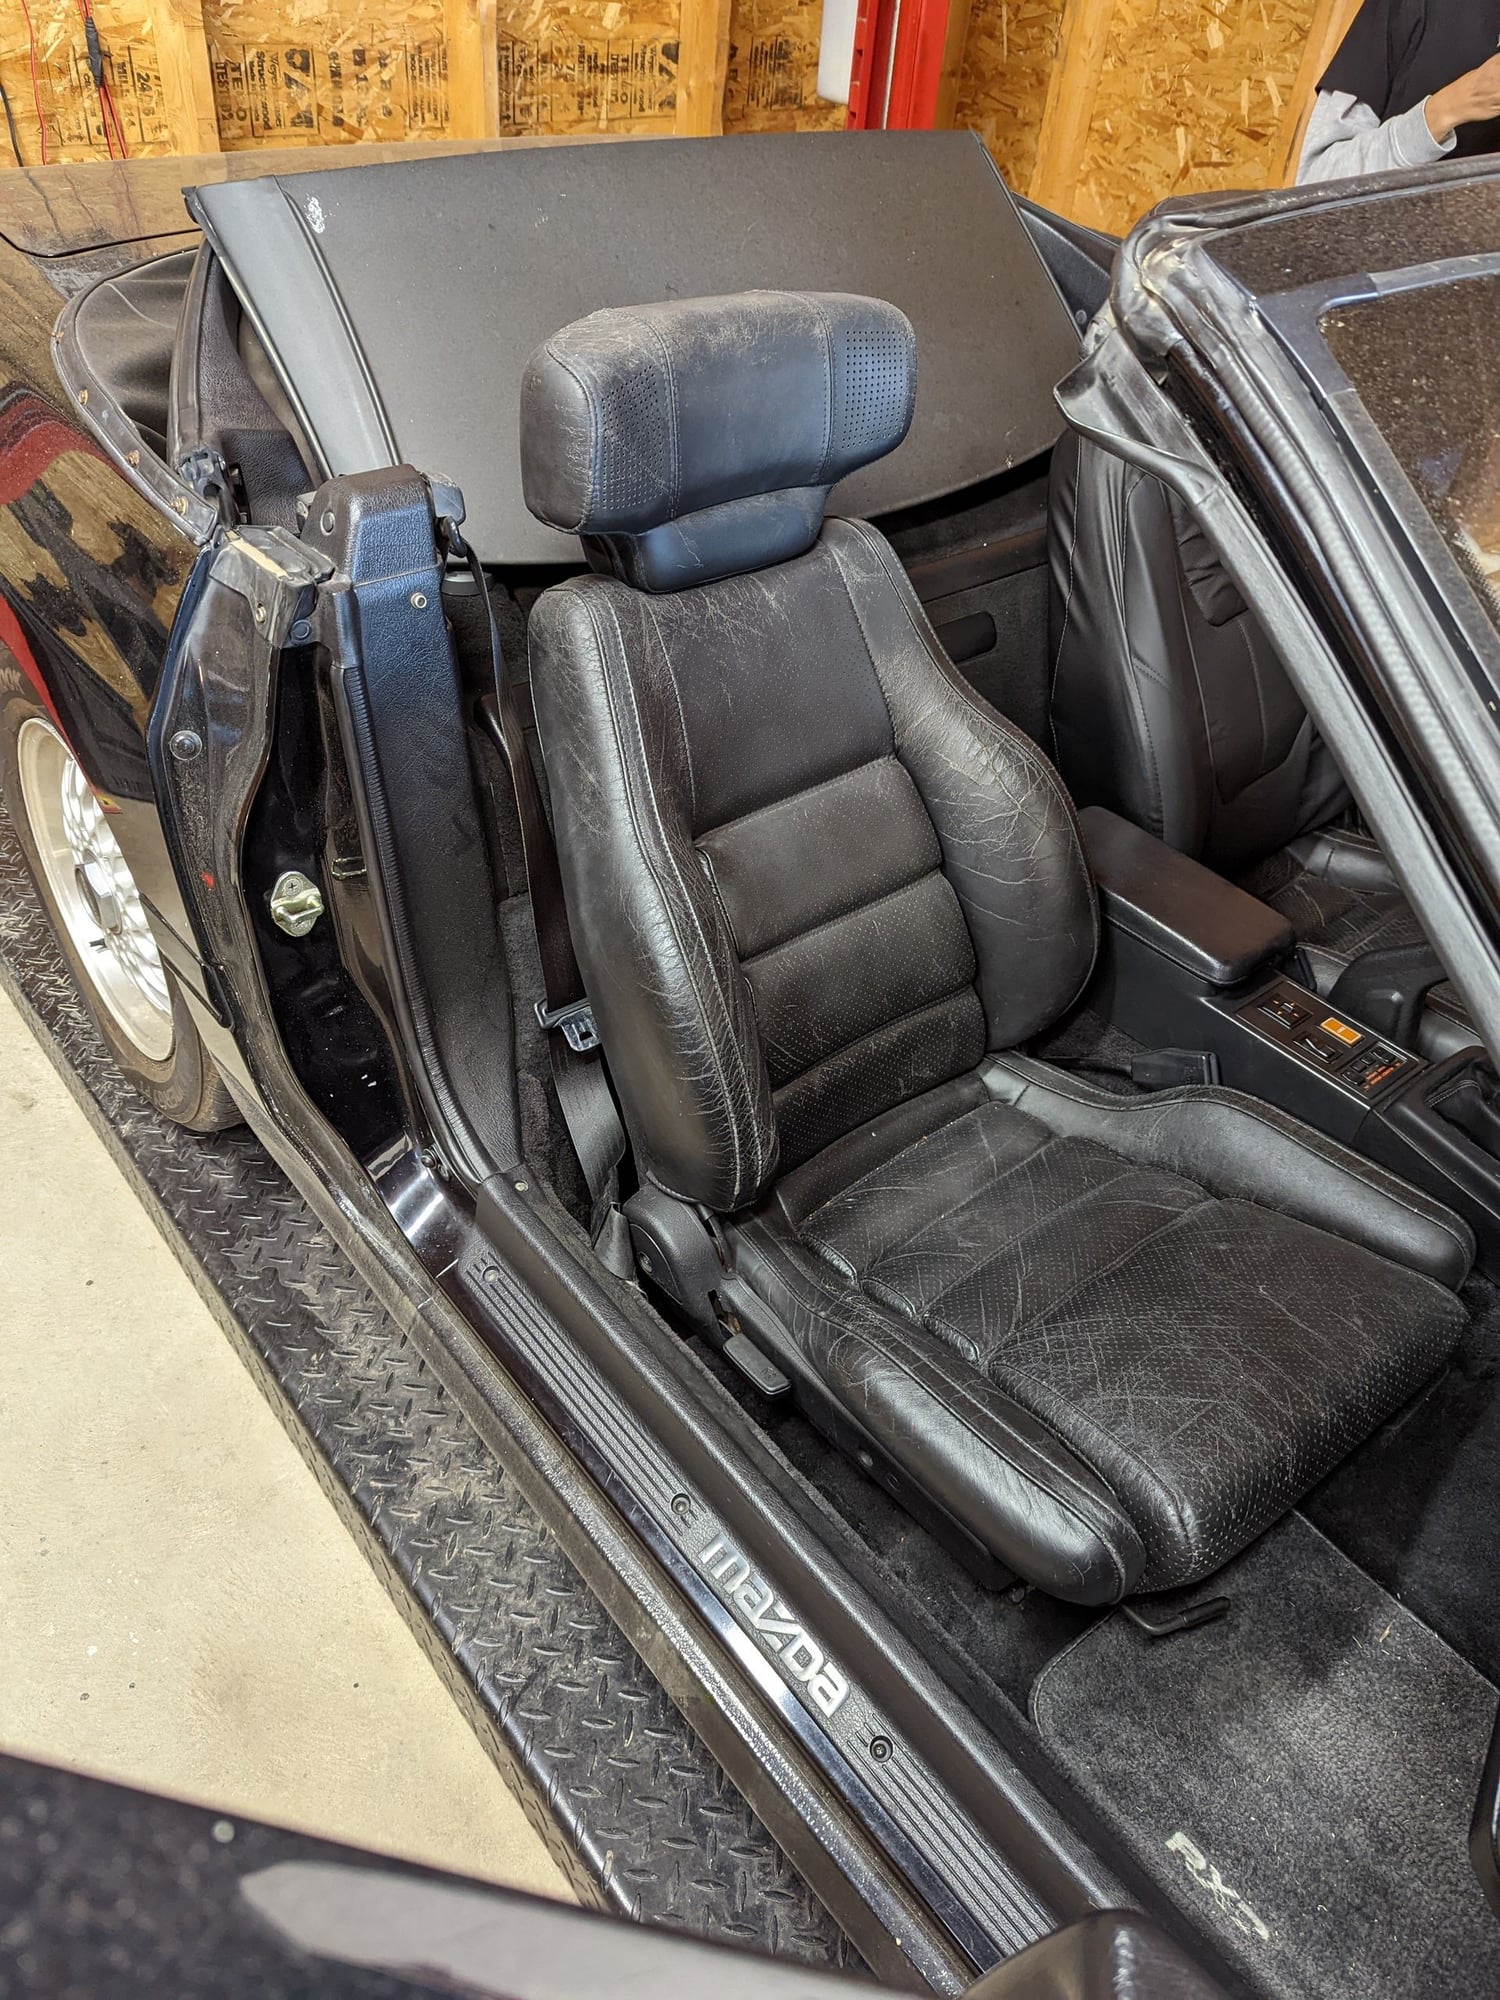 Interior/Upholstery - WTB convertible S5 black leather seats - New or Used - 1989 to 1990 Mazda RX-7 - Toronto, ON N3W1X3, Canada